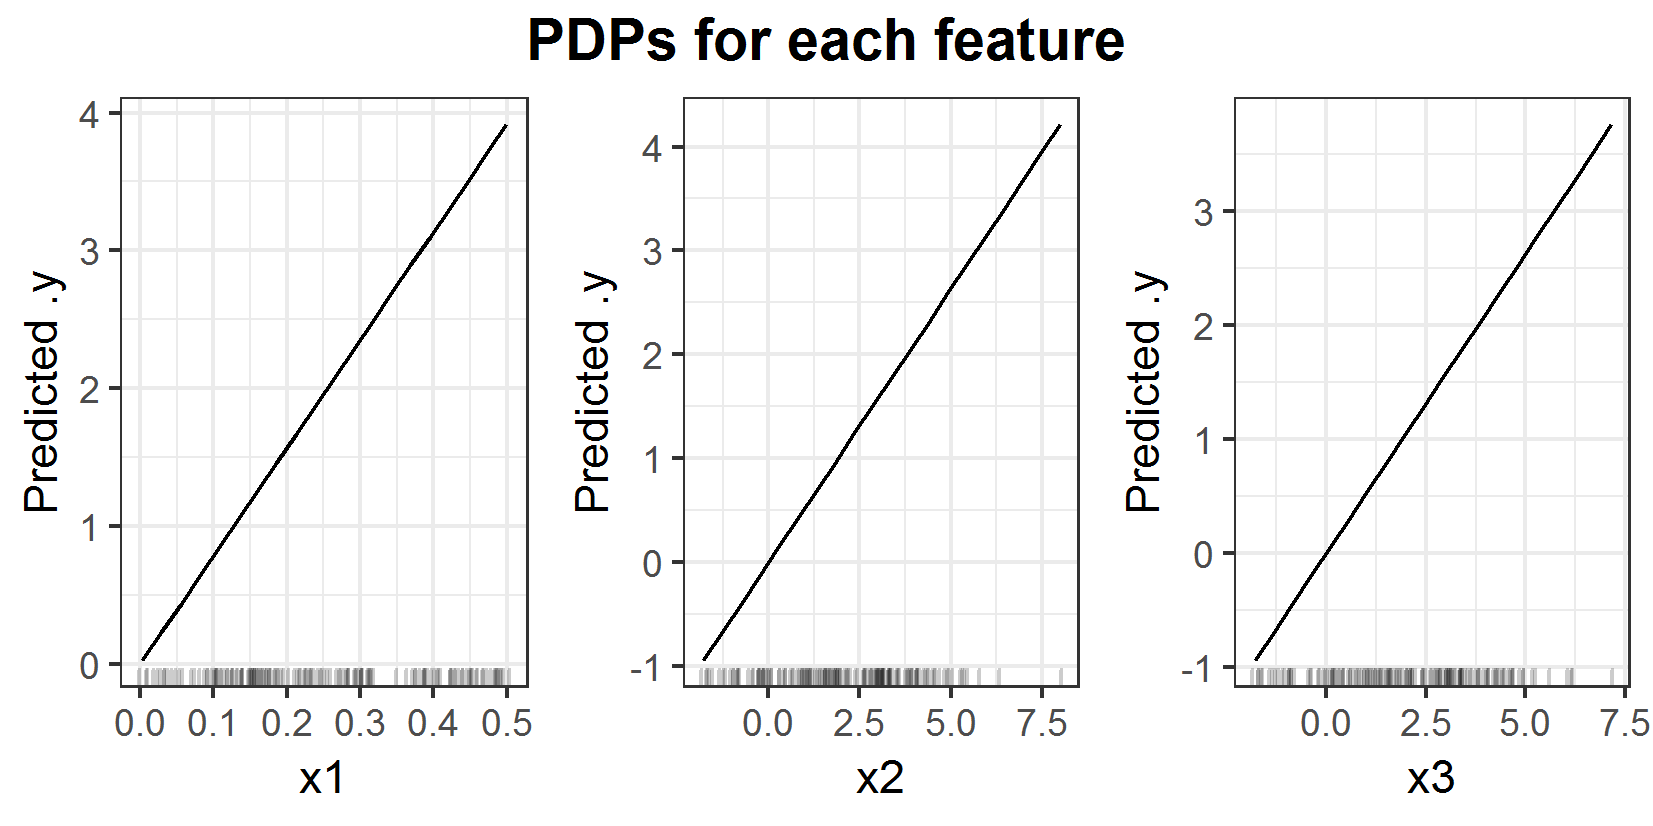 PDPs for prediction function \(f(x_1, x_2, x_3) = x_1 x_2 x_3\).